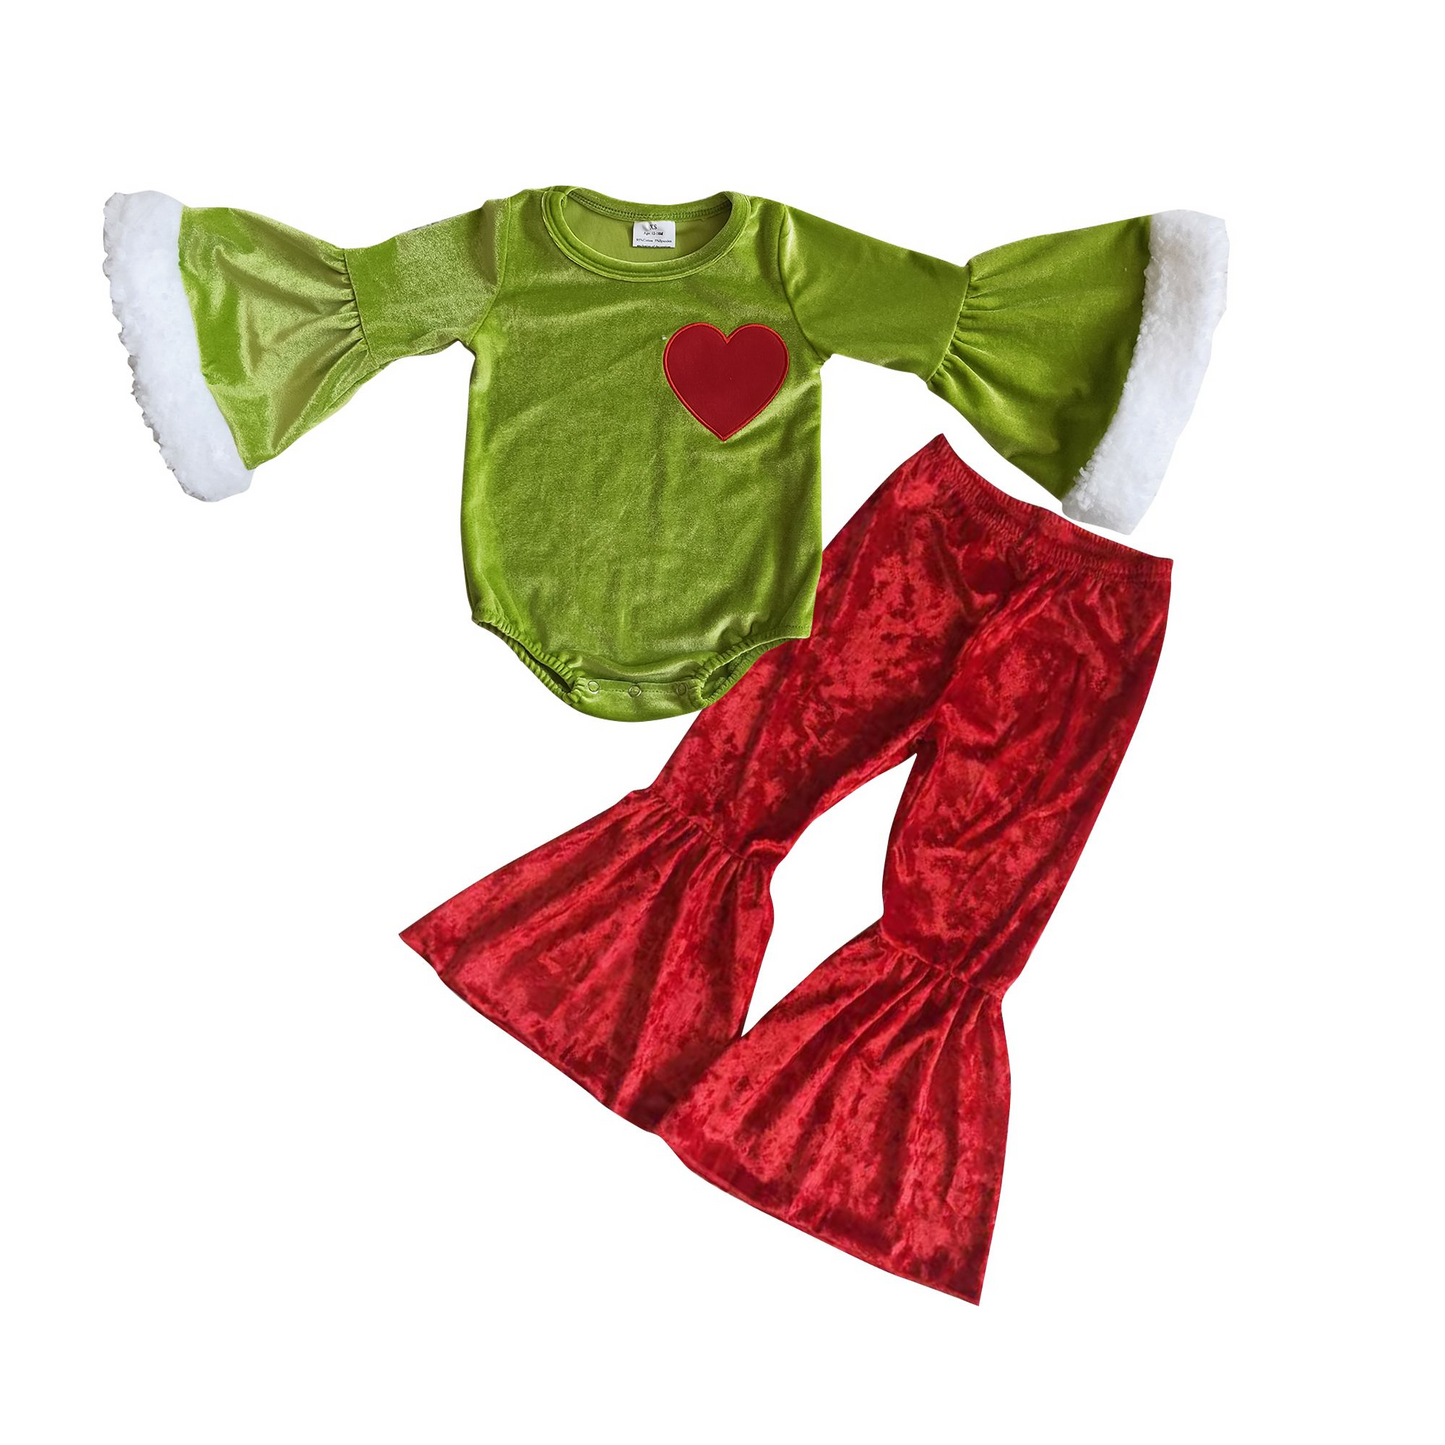 Heart embroidery green face romper 6 A4-4 red velvet pants B3-11 girls Christmas outfits